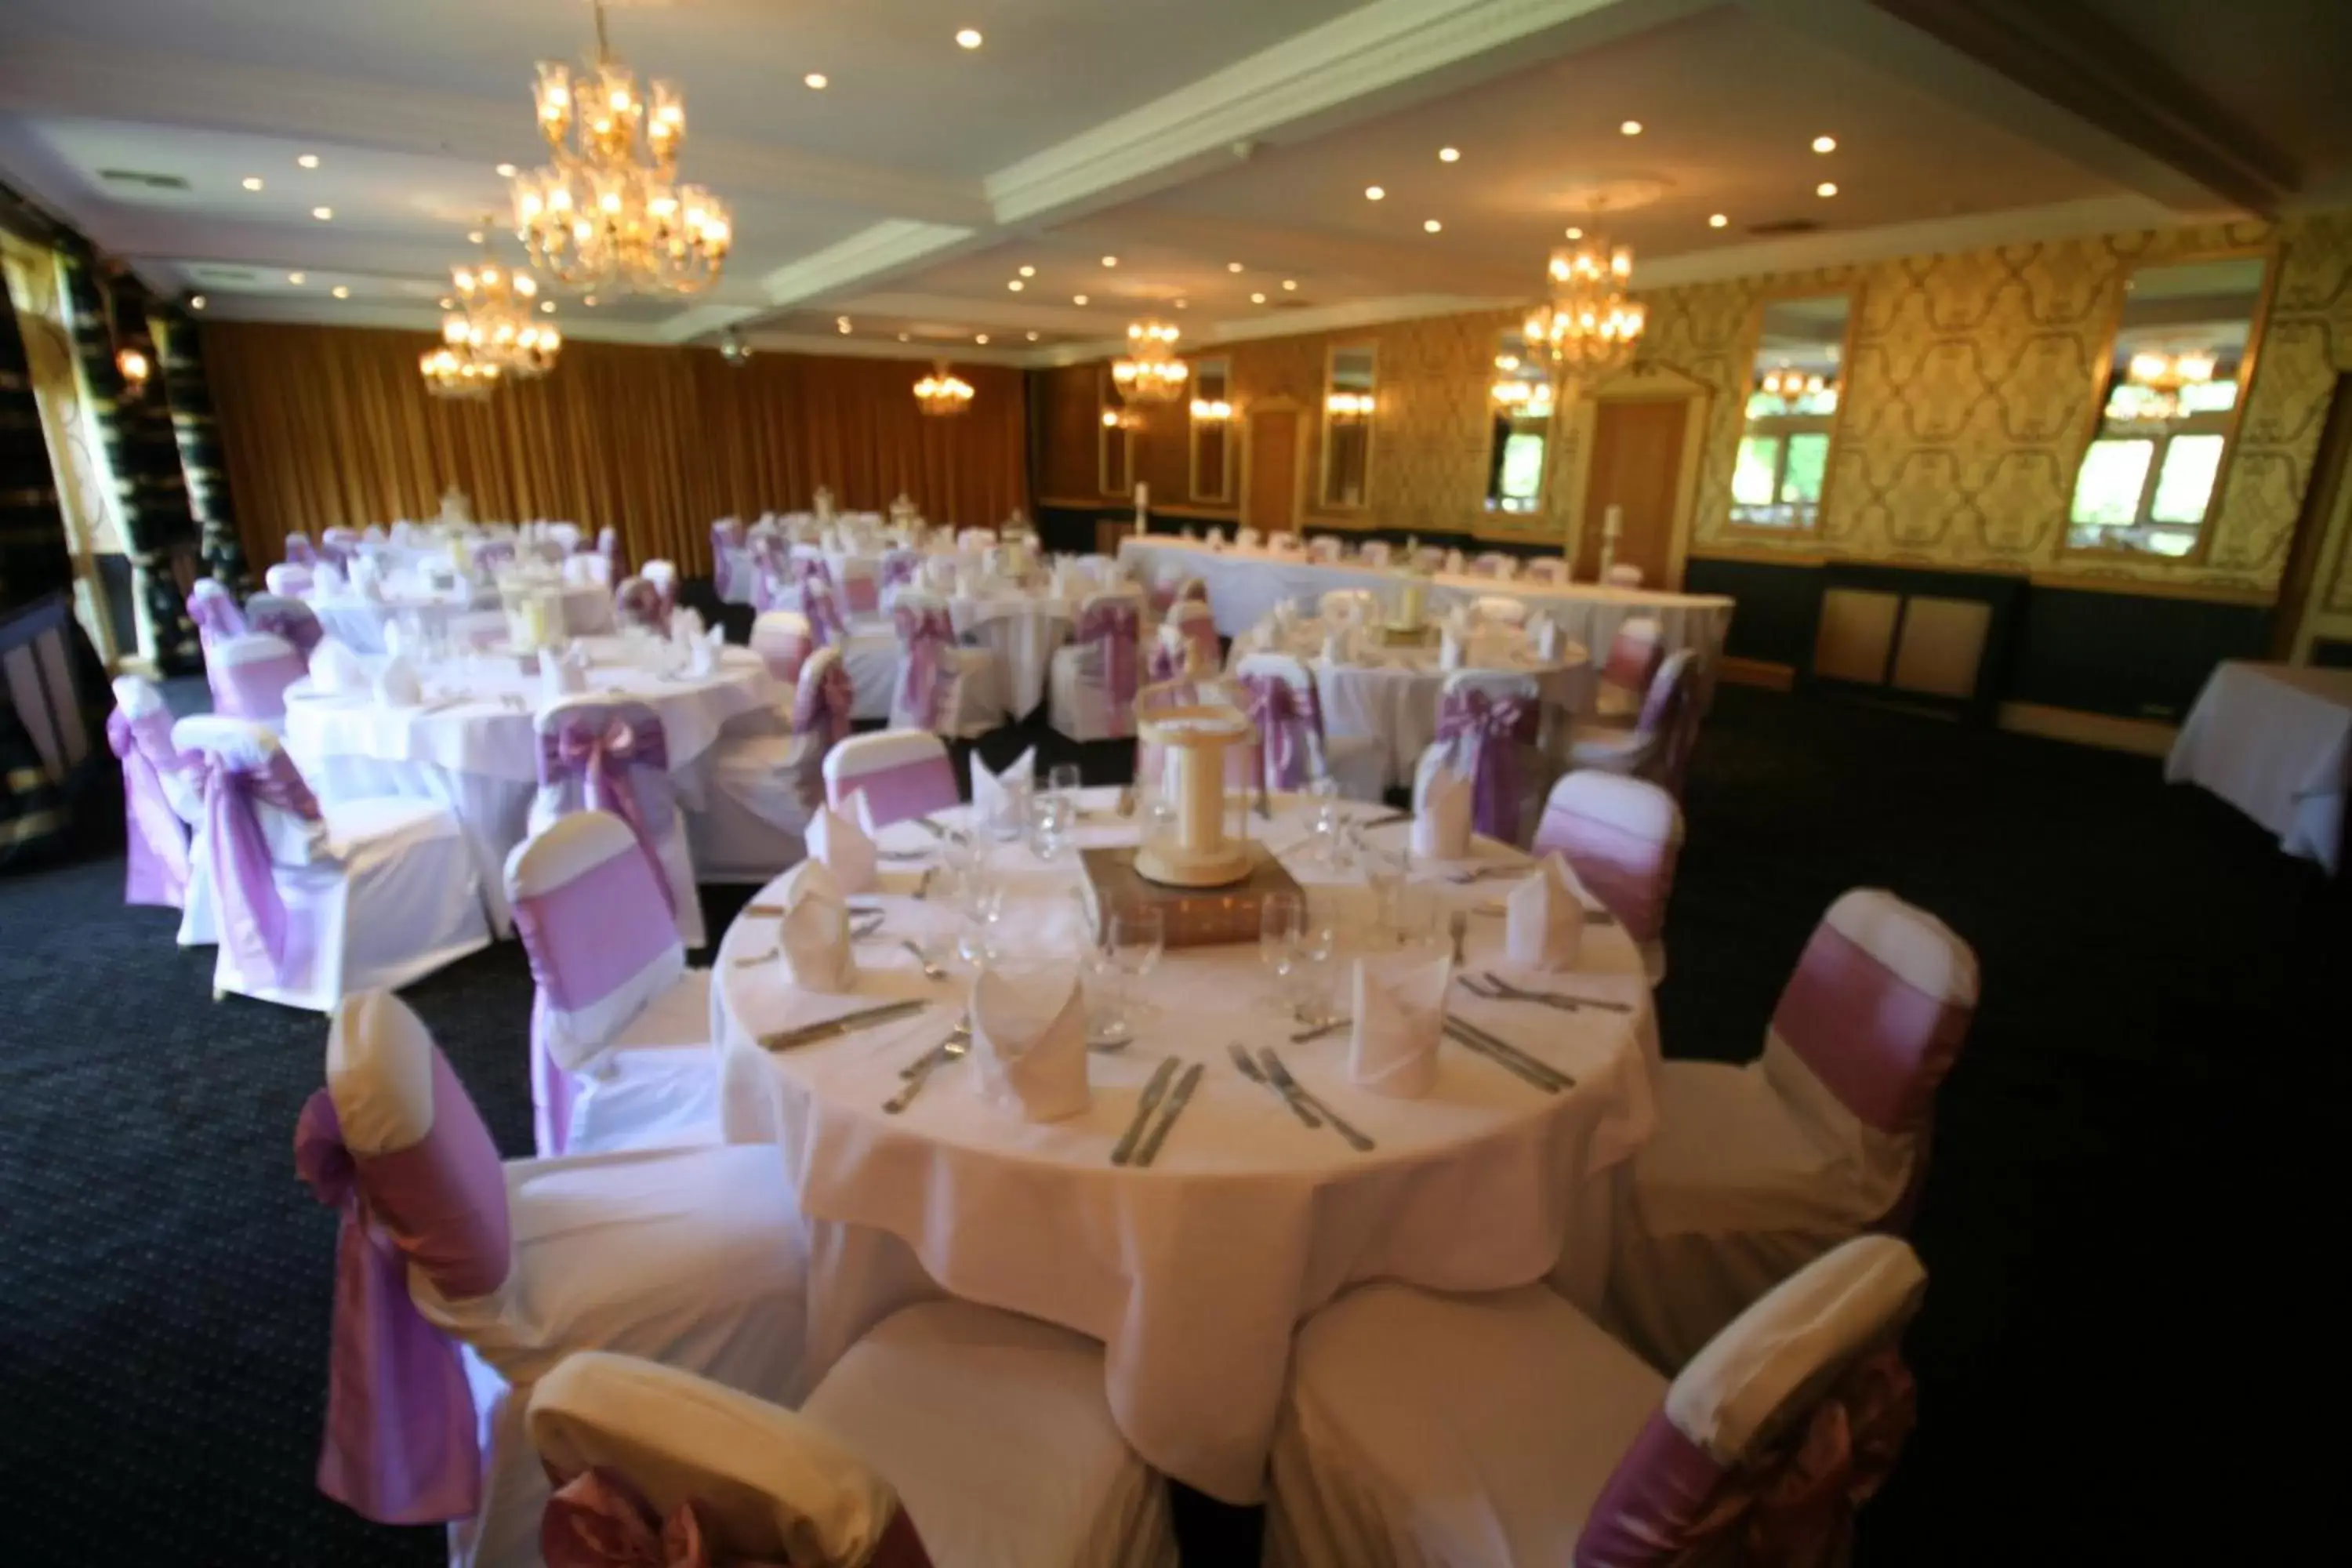 Banquet/Function facilities, Banquet Facilities in Cricklade House Hotel, Sure Hotel Collection by Best Western